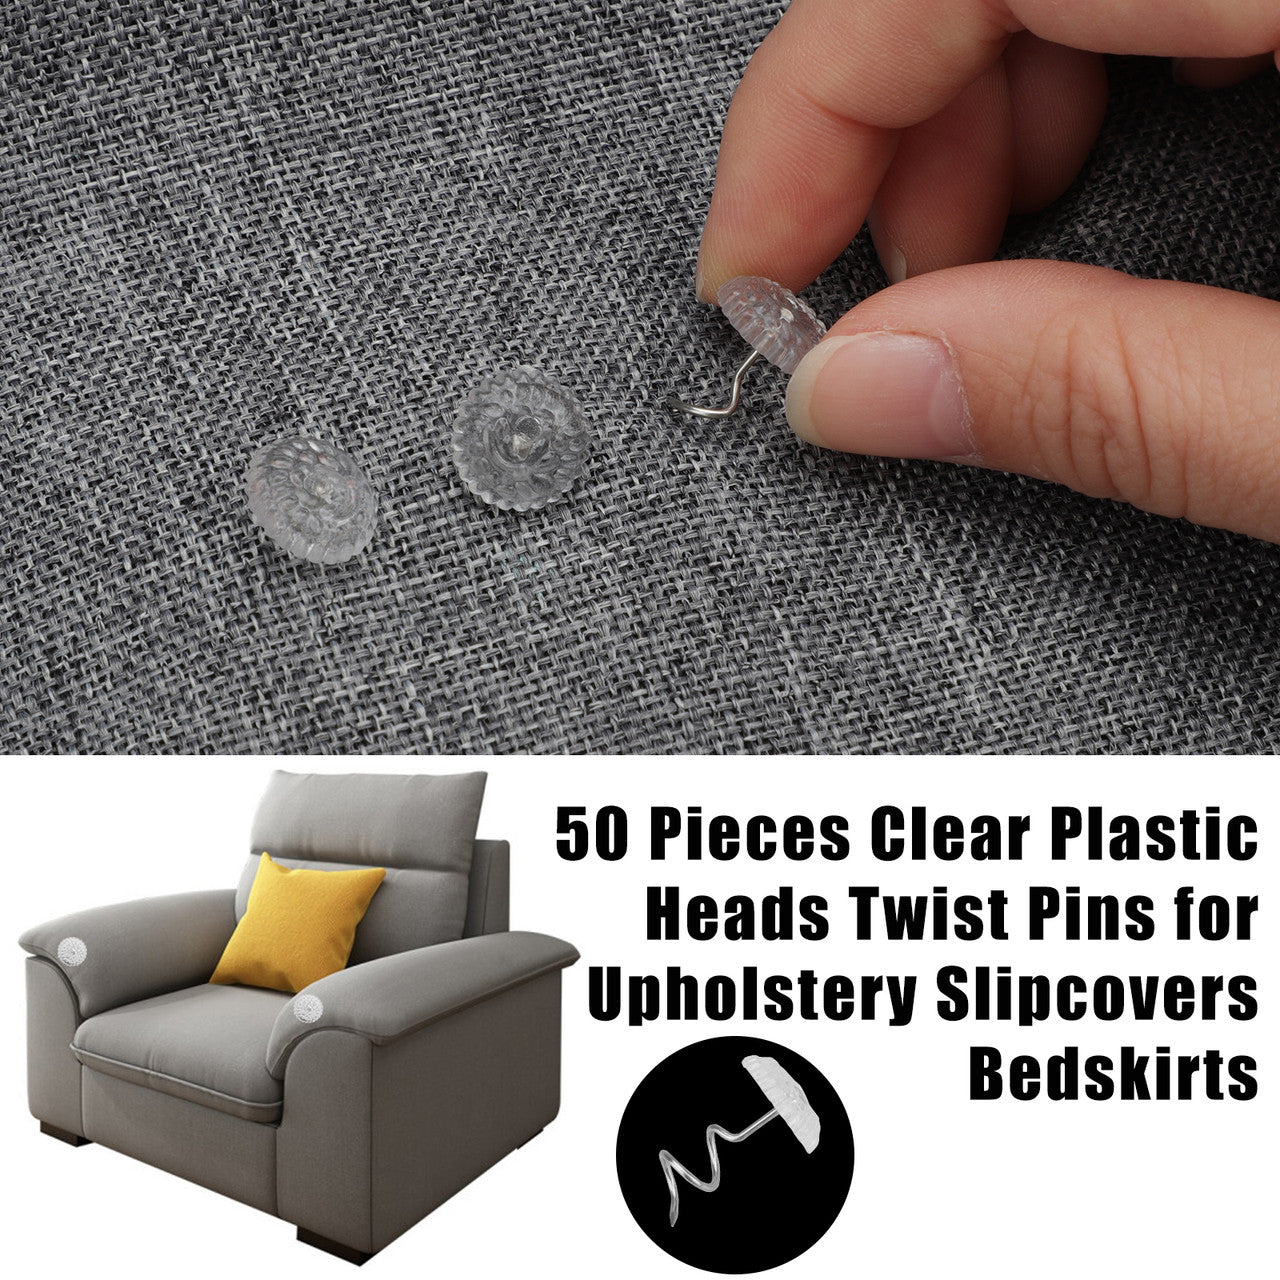 Set of 50, Fabric Twisty Pins with Clear Heads for Upholstery, Bedskirts, Slip Covers, Slipcovers and Other Materials - Sewing Supplies Essential